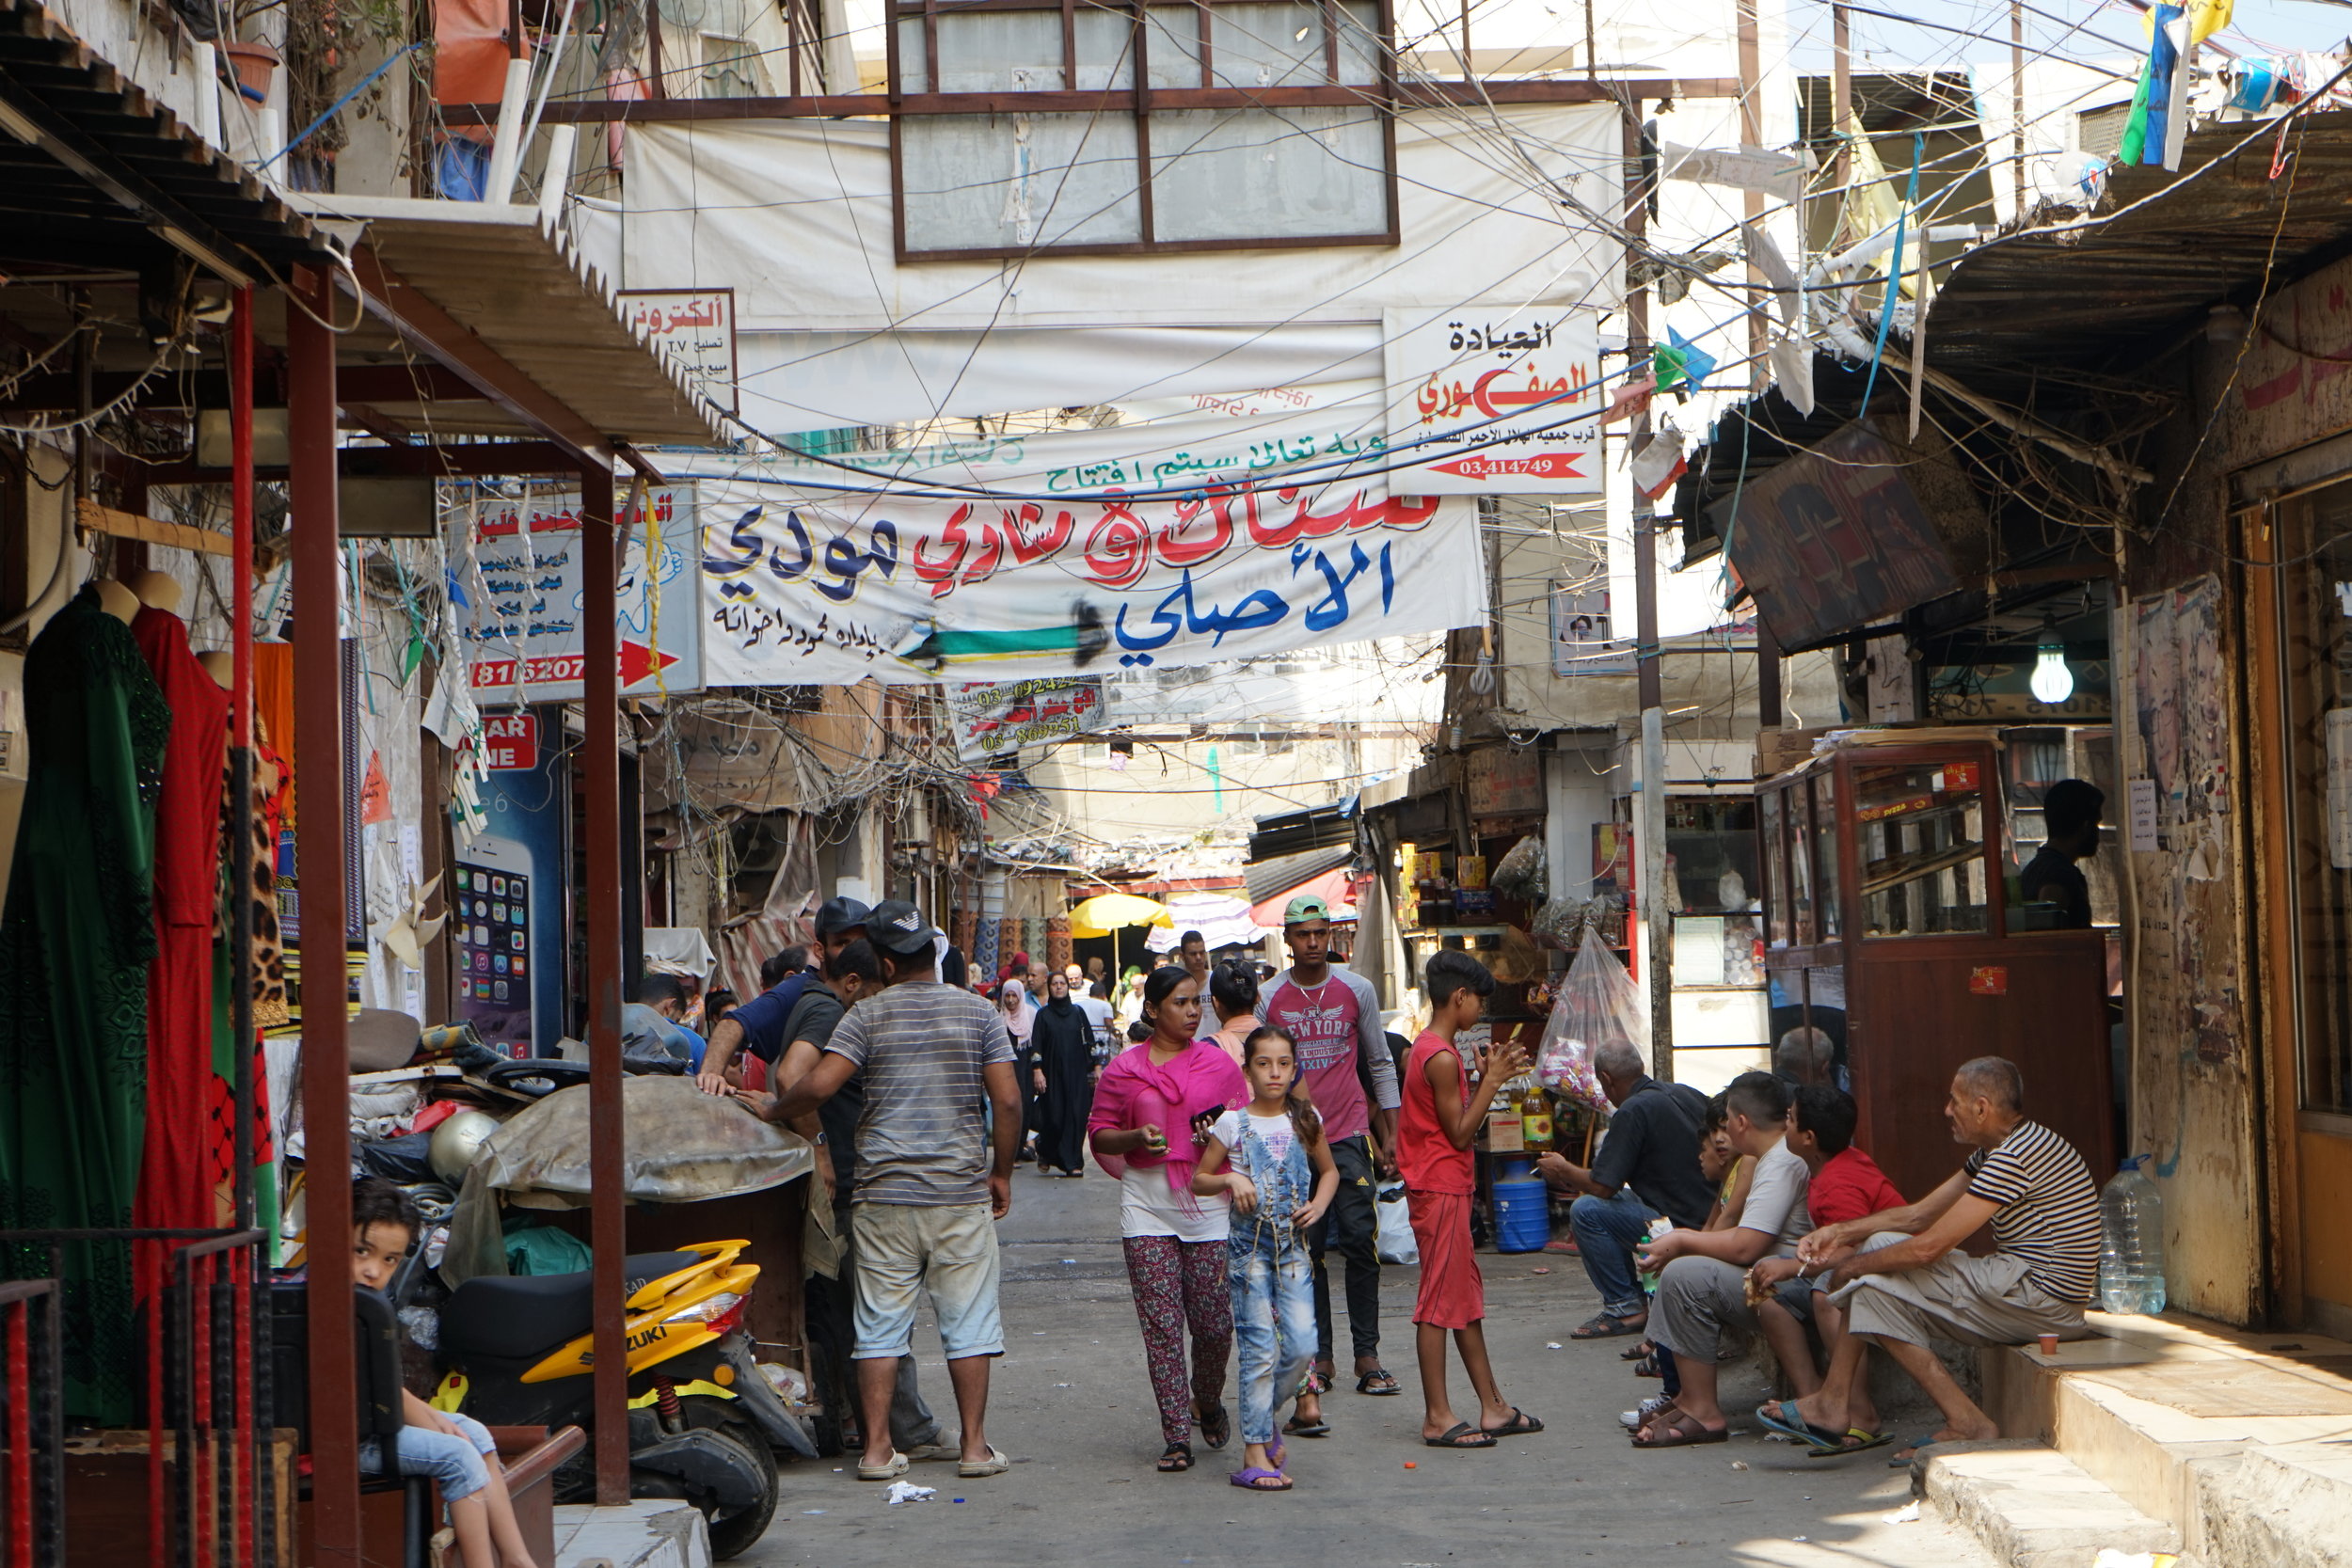  Residents walk through the market in Sabra and Shatila on August 18, 2016. 